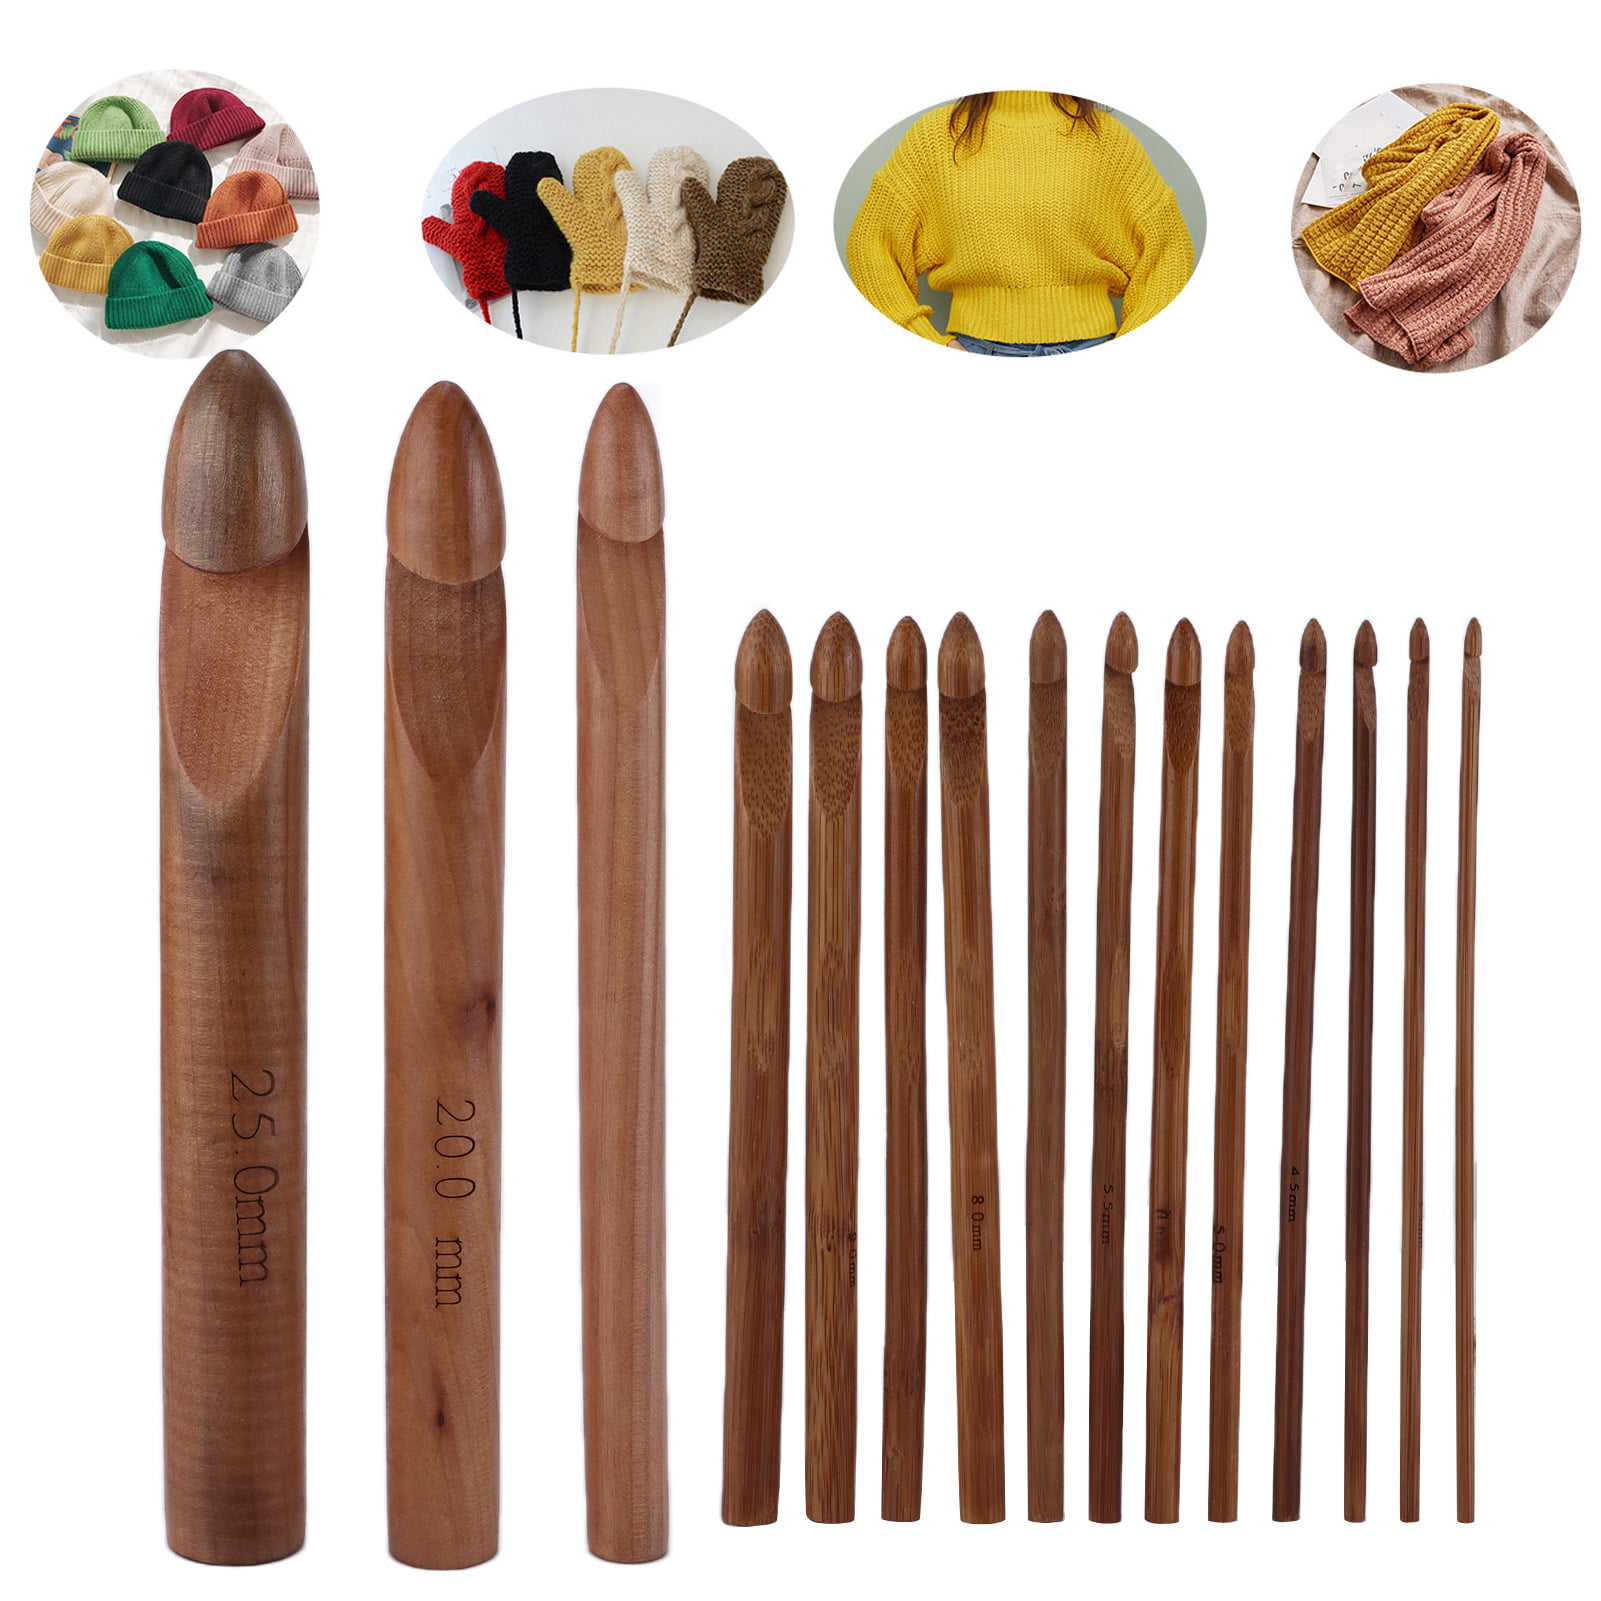 12pcs Bamboo Crochet Hook Set, 3mm-10mm Ergonomic Crochet Needles For  Knitting, Smooth, Comfortable, Durable, Suitable For Beginners And Crochet  Enthusiasts